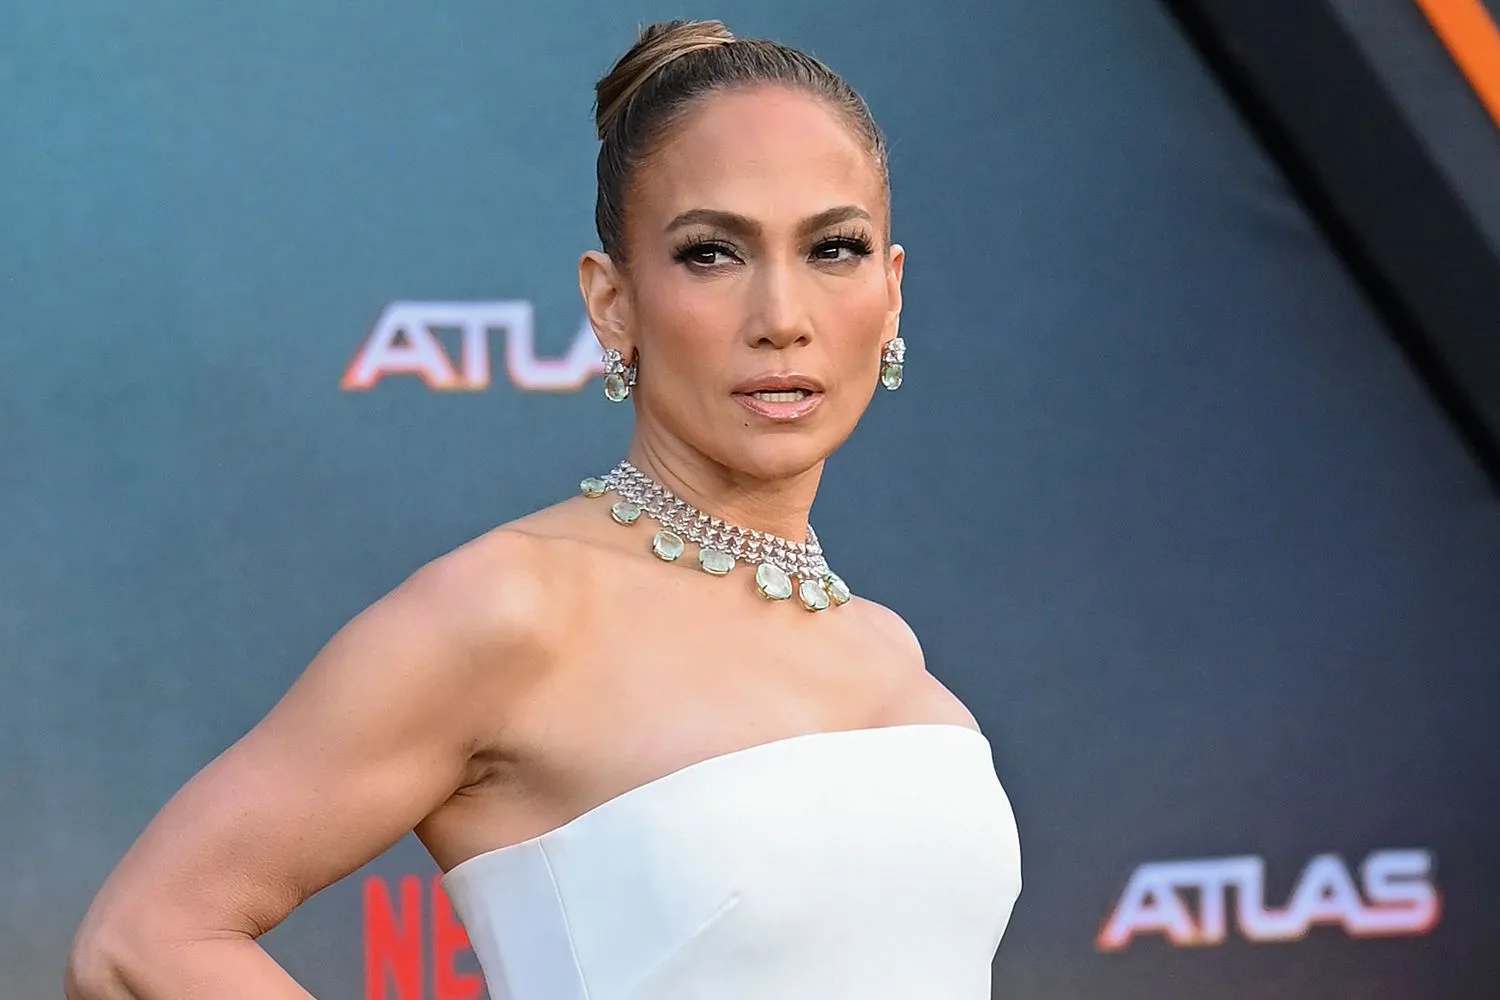 jennifer-lopez-apparently-ignores-ben-affleck-related-questions-at-atlas-premiere